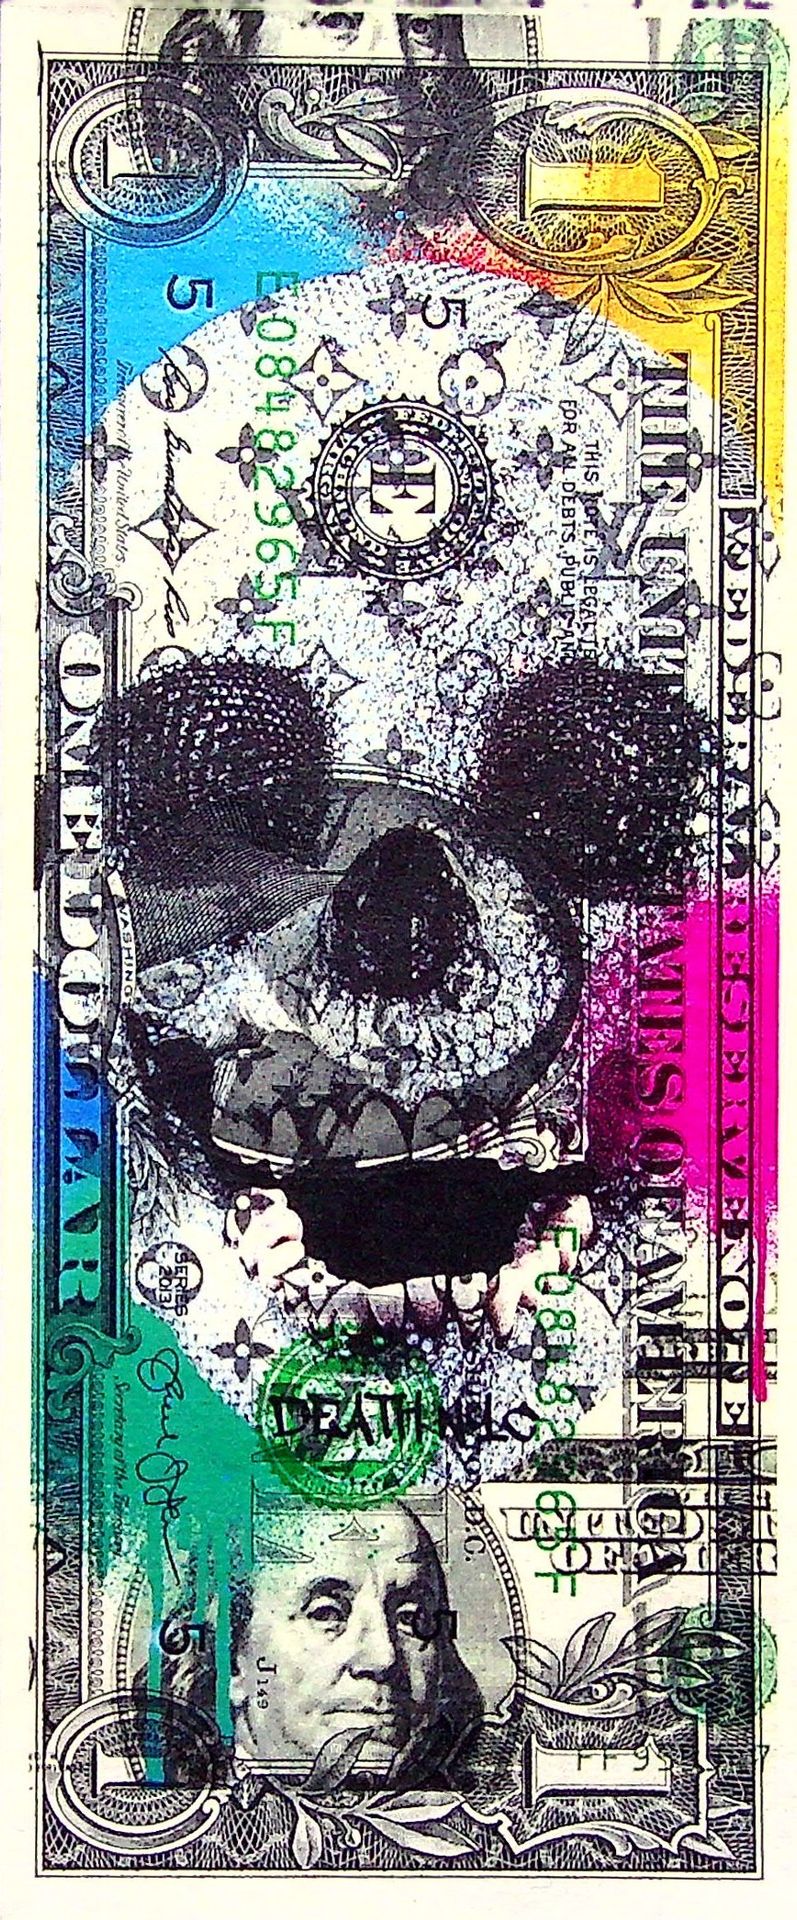 Death NYC Death NYC

Skull with a multicolor background

Sérigraphie originale d&hellip;